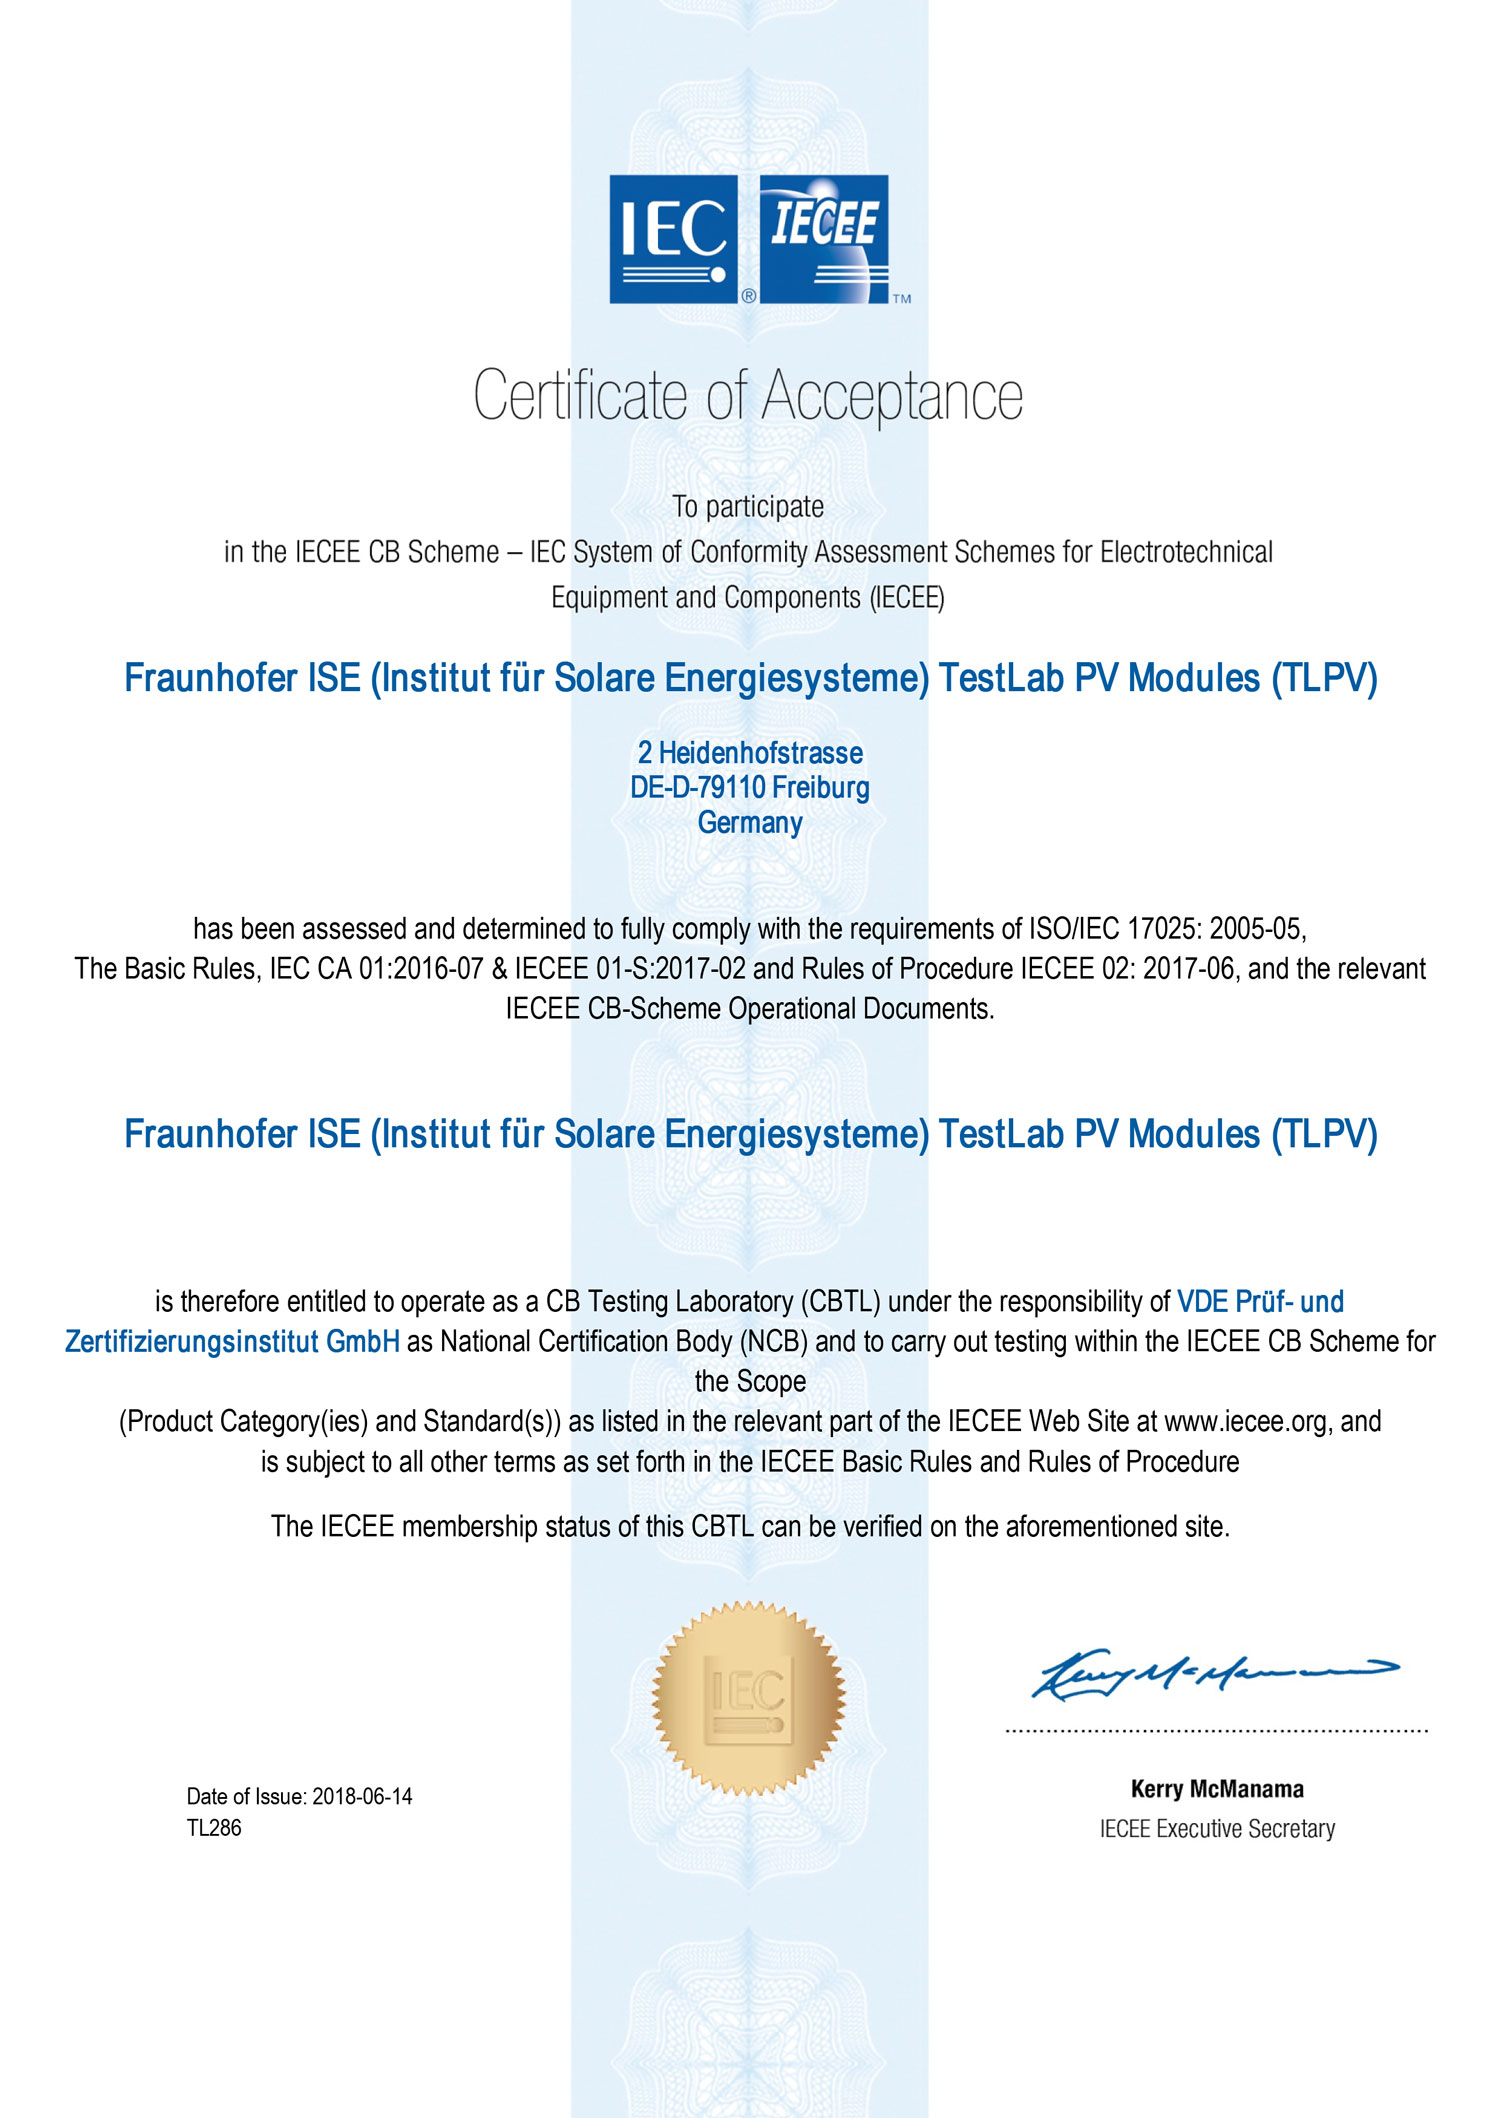 Certificate of Acceptance to participate in the IECEE CB-Schem